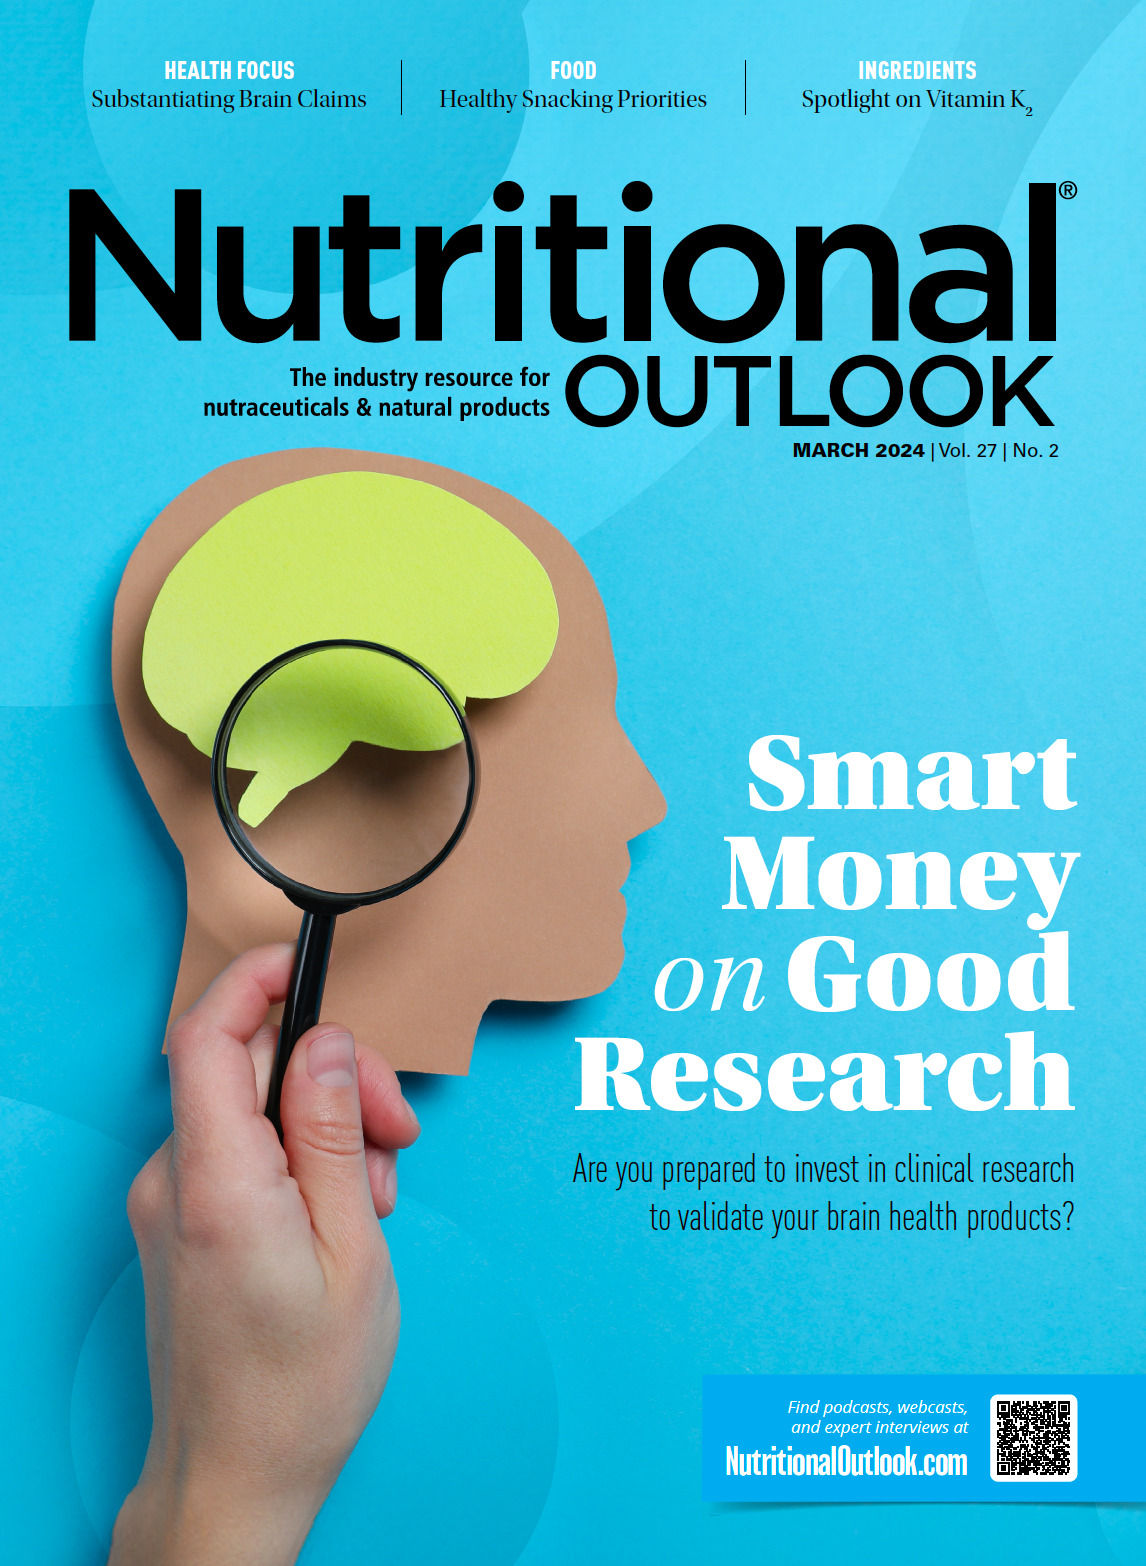 Nutritional Outlook Vol. 27 No. 2